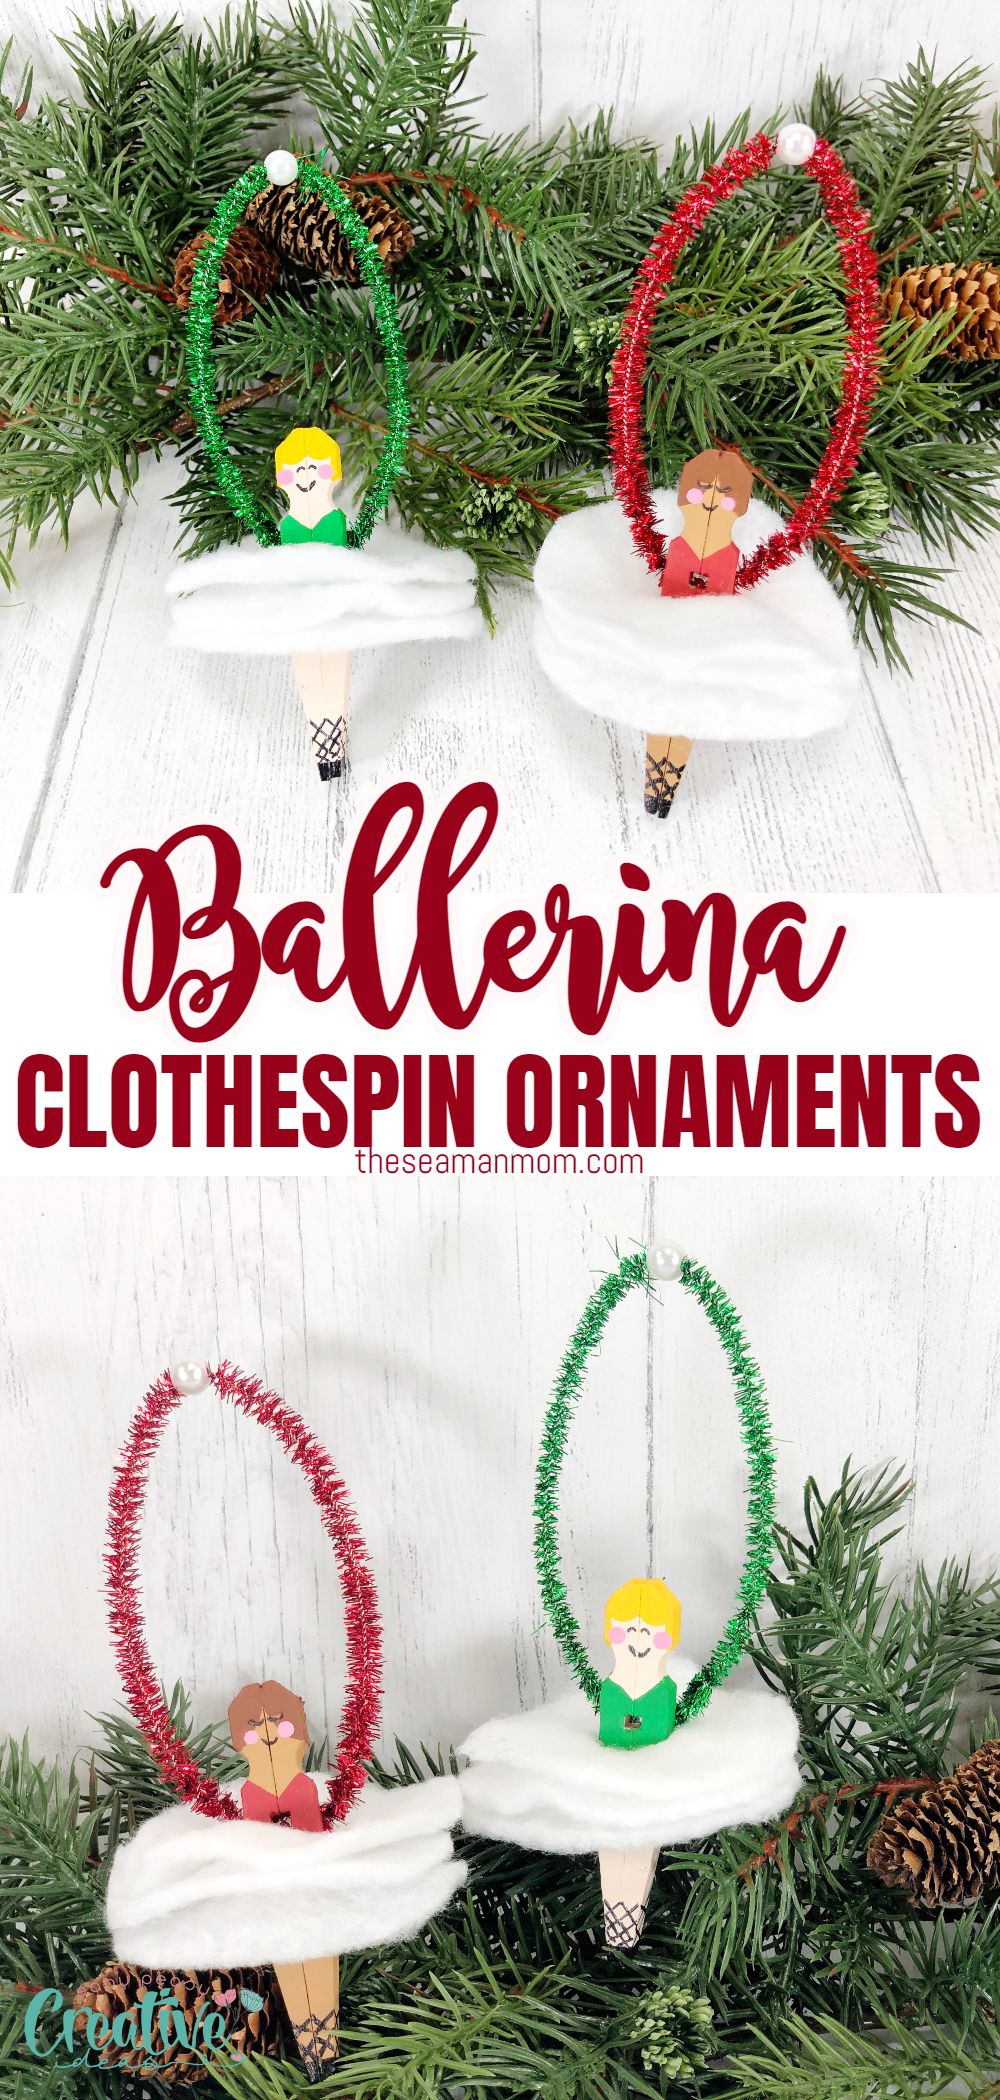 This Christmas, make your tree stand out with these unique and elegant decorations. Your Christmas tree will look gorgeous this holiday season with these ballerina Christmas ornaments! via @petroneagu